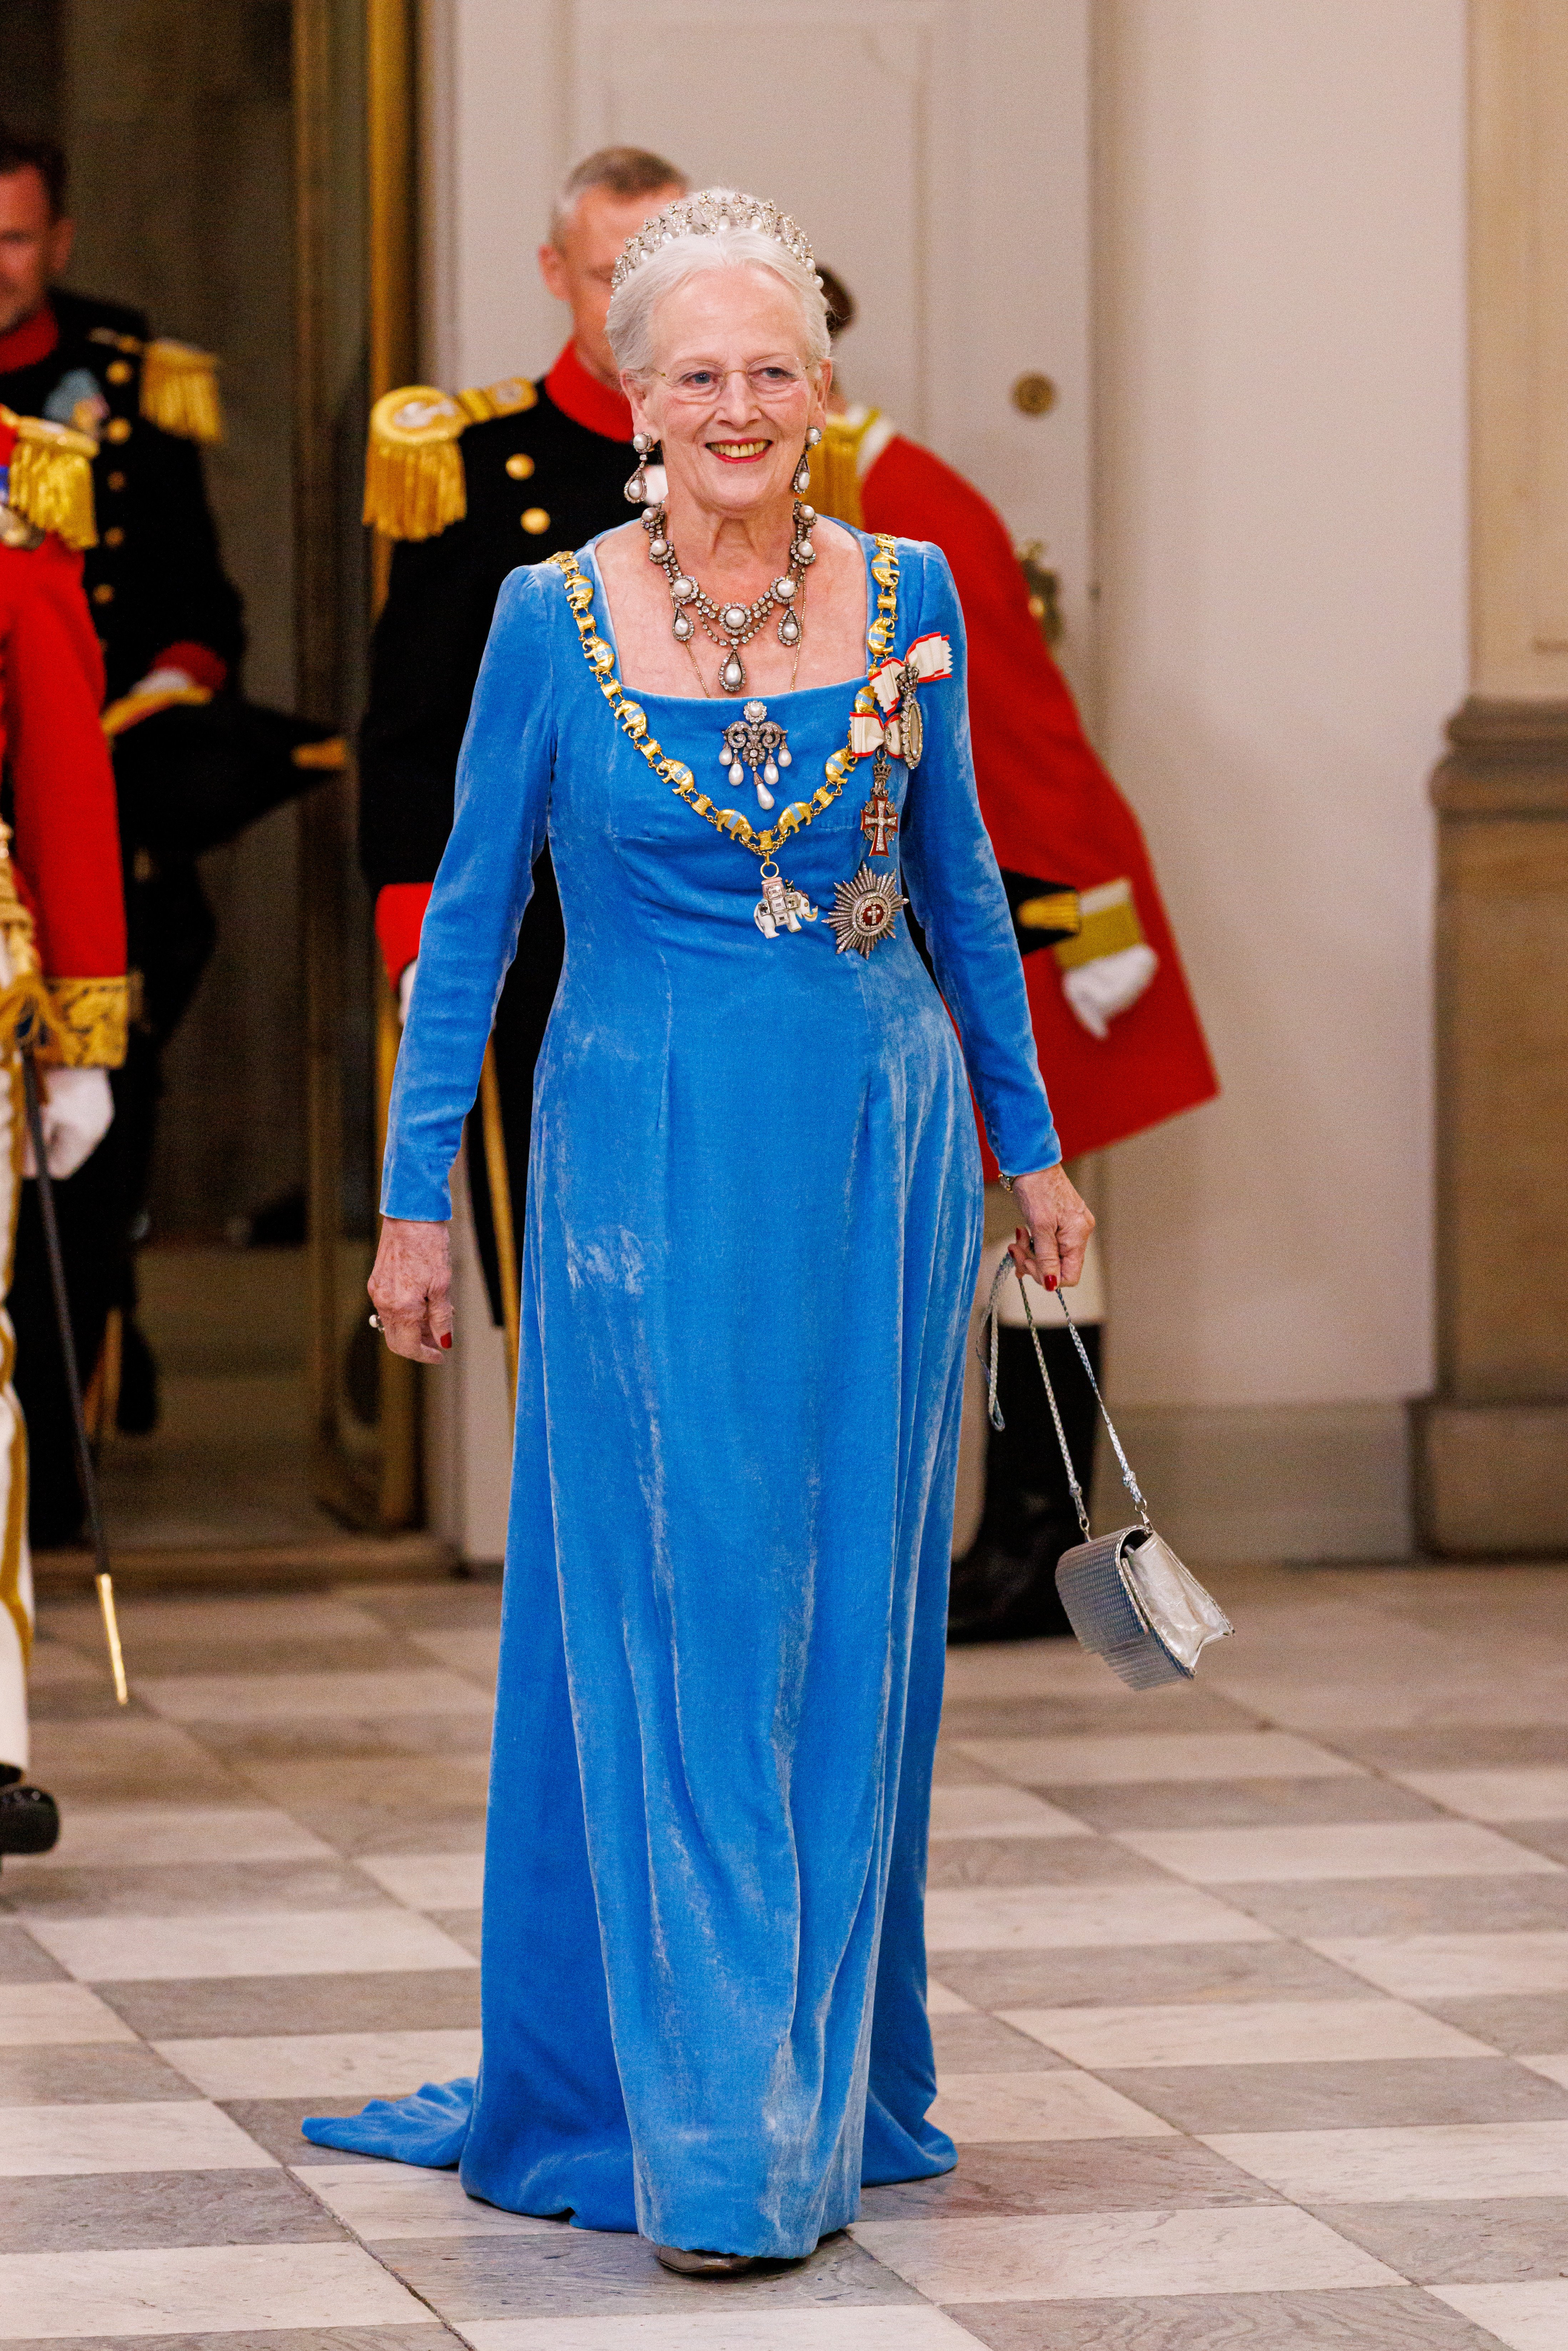 Queen Margrethe of Denmark at Christiansborg palace for the gala dinner during the 50th anniversary of Her Queen Margrethe II of Denmark's accession to the throne on September 10, 2022, in Copenhagen, Denmark. | Source: Getty Images